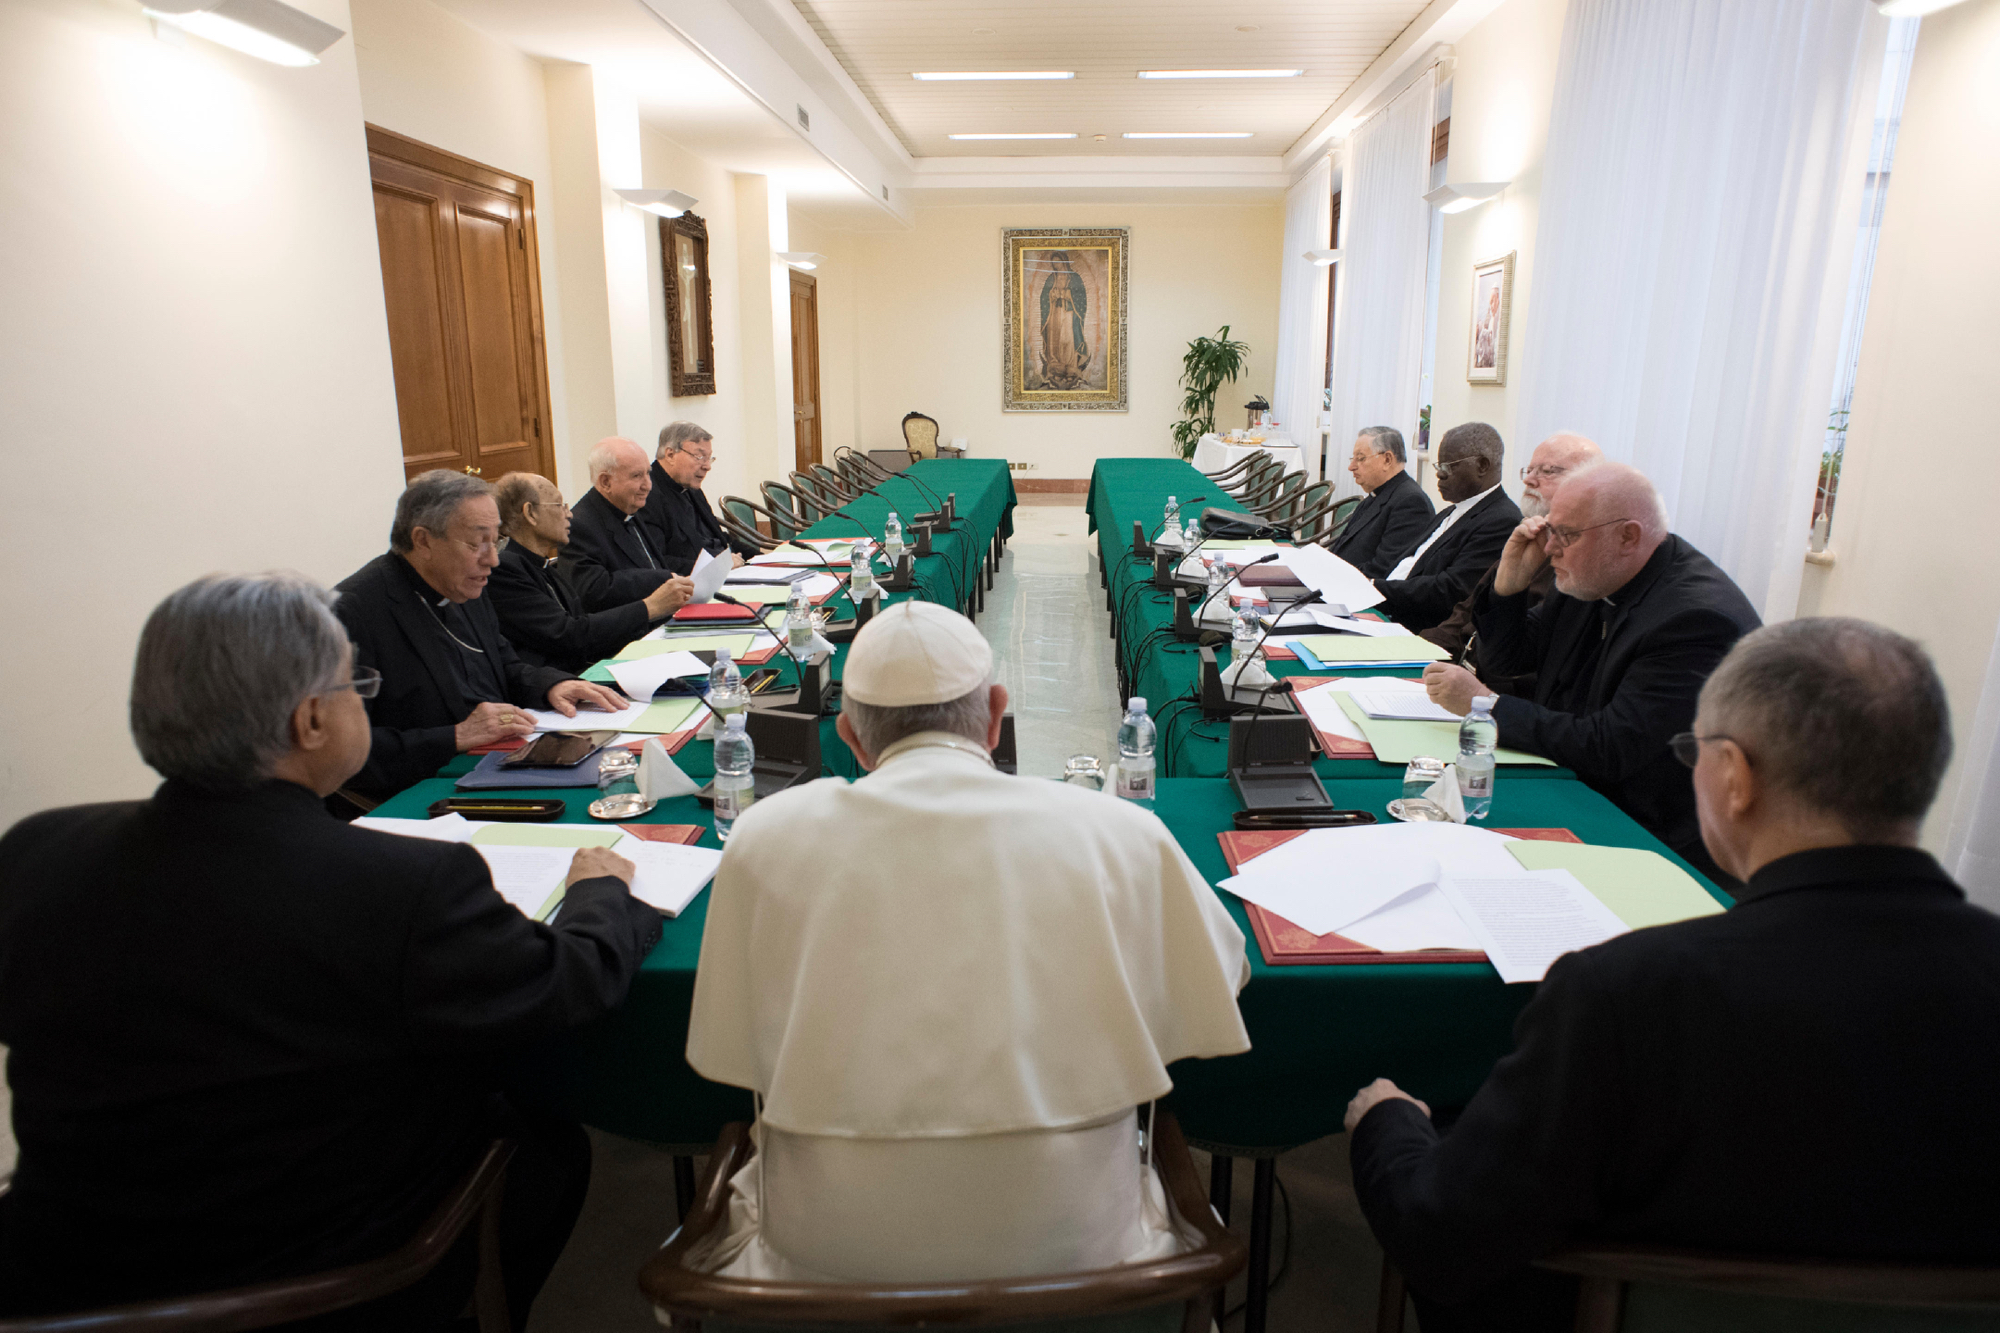 Pope, Council of Cardinals discuss new document on Roman Curia